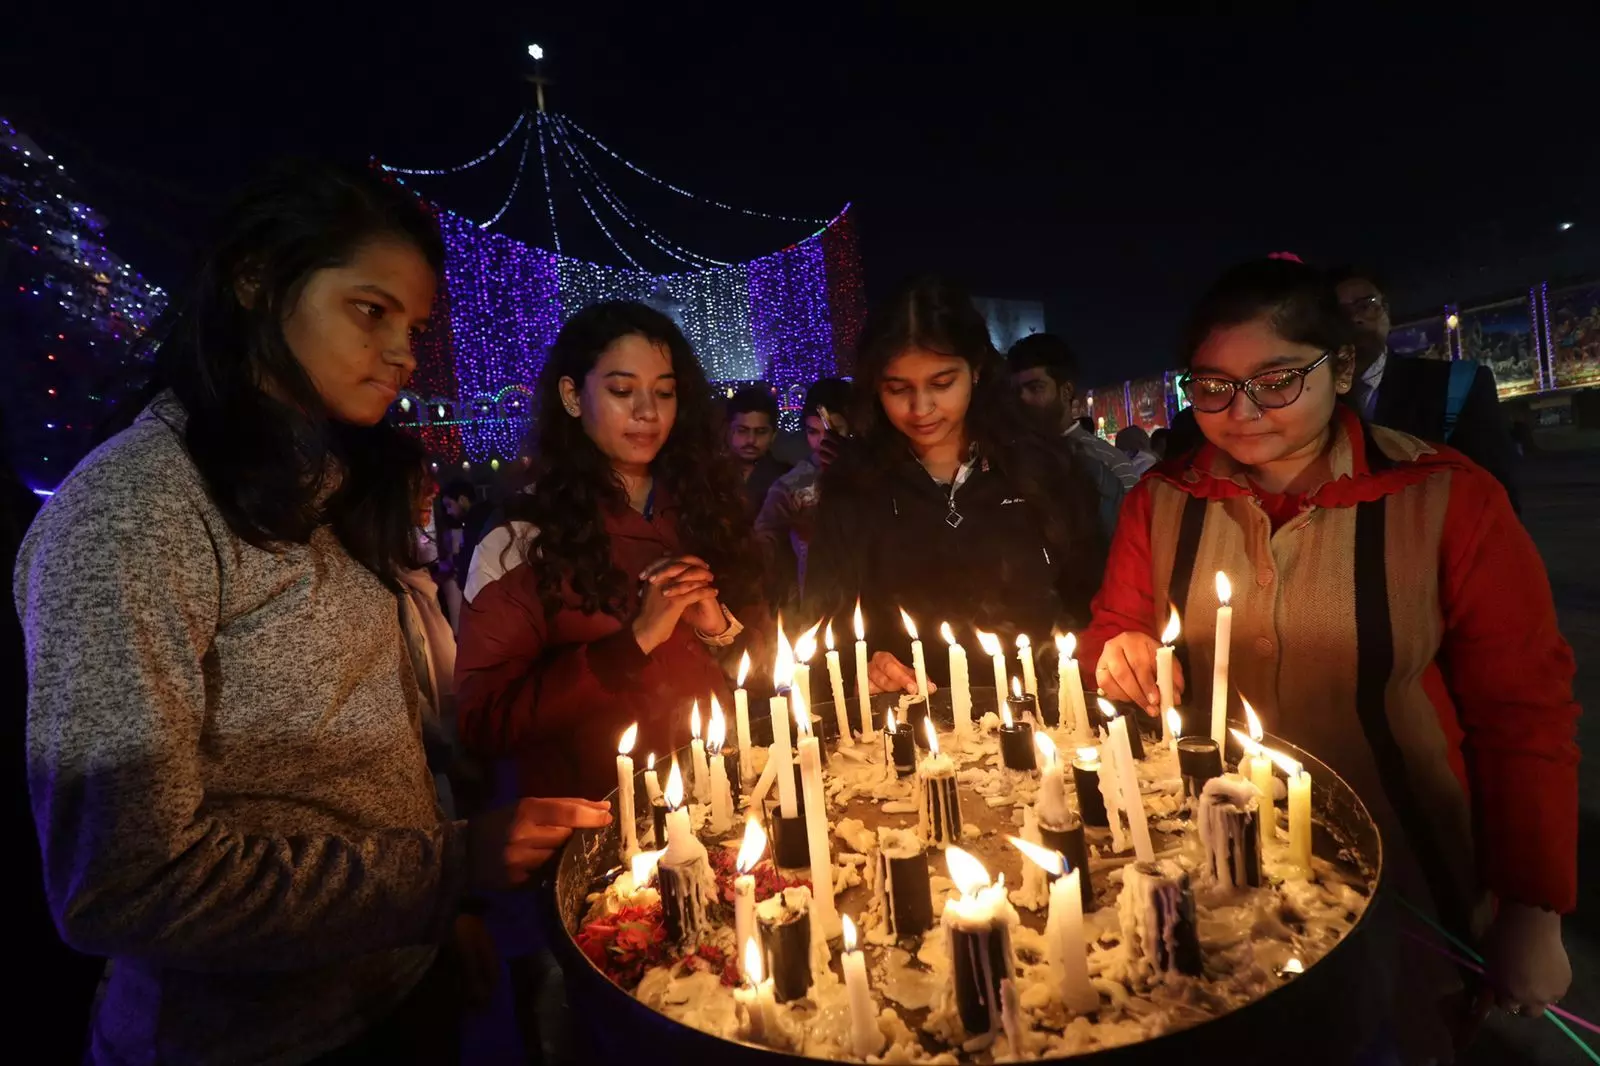 Christmas Day: People praying by lighting candles at Cathedral Church on Christmas Eve, see photos